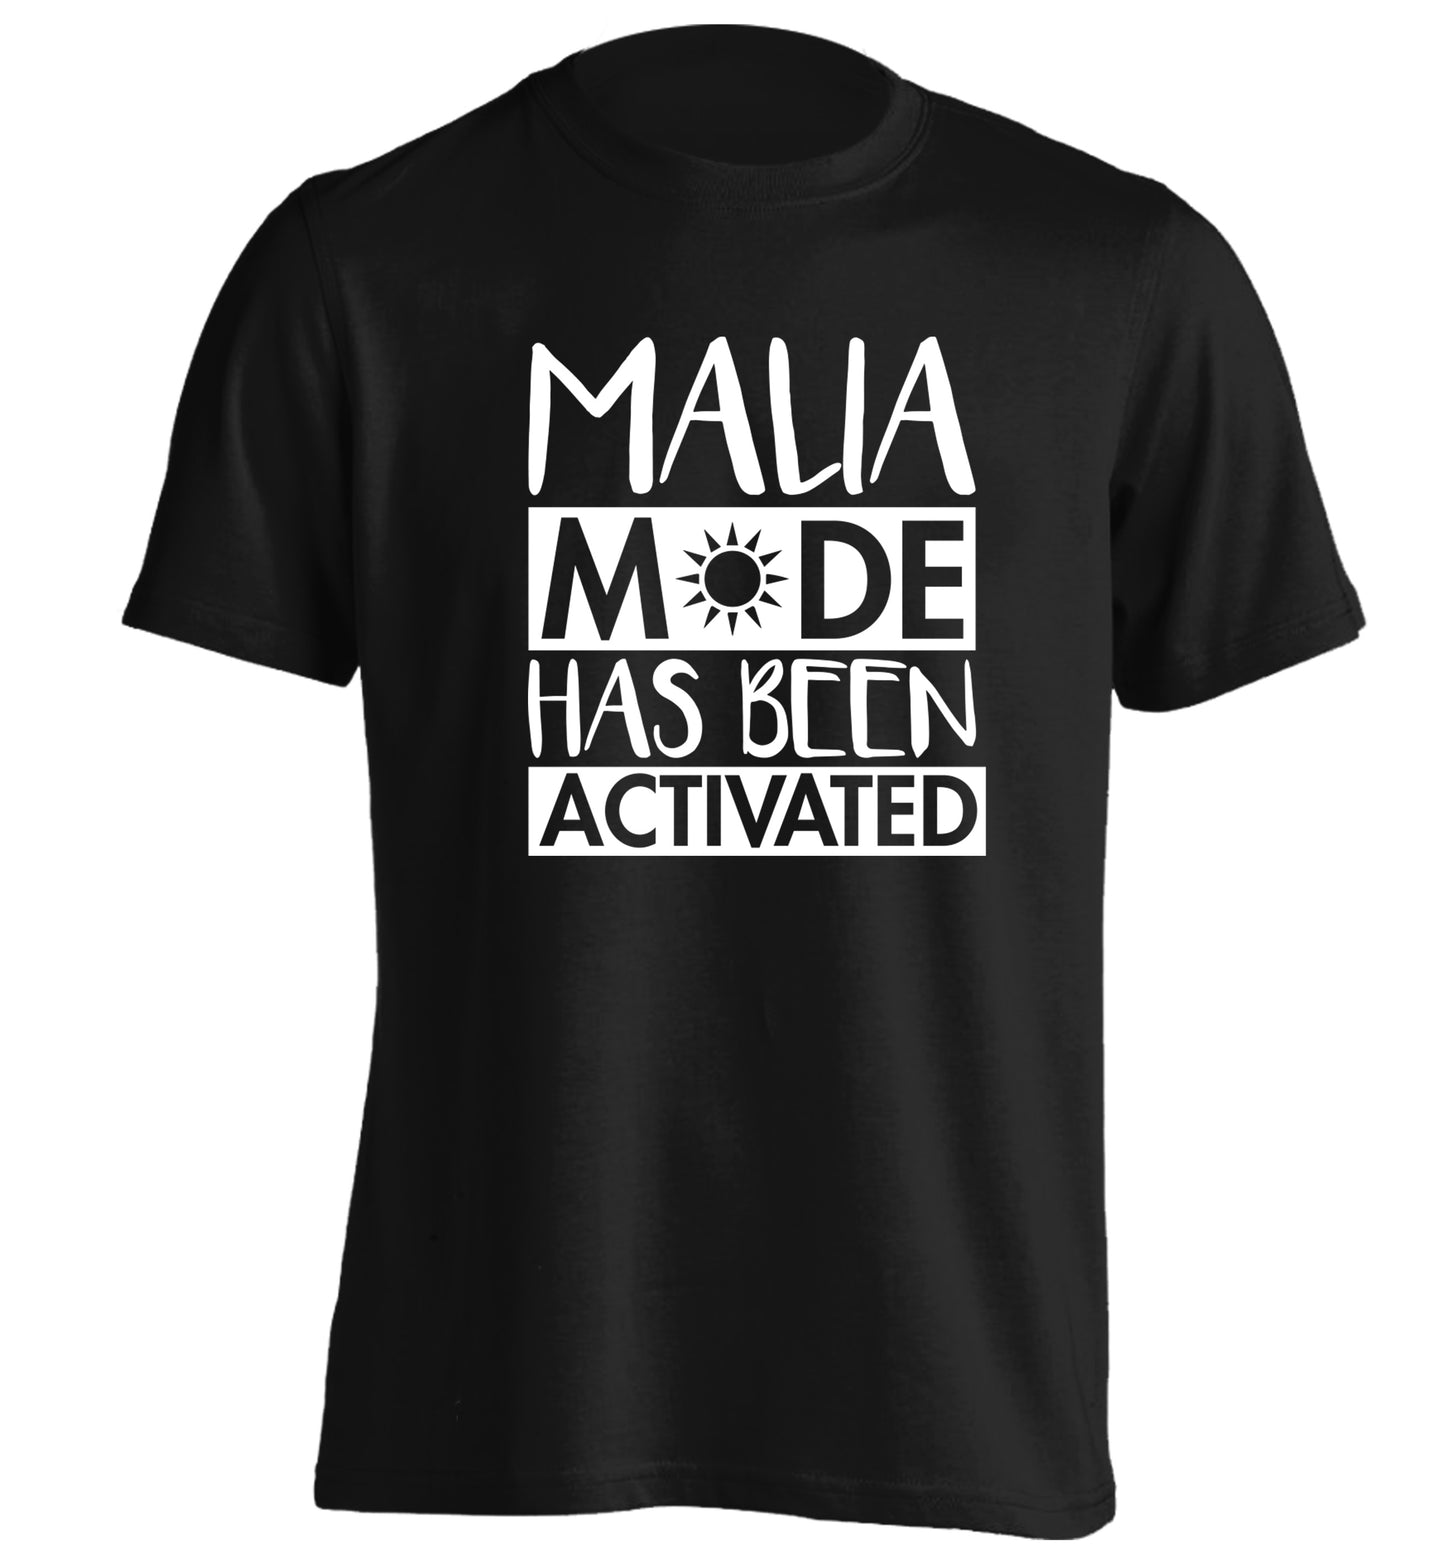 Malia mode has been activated adults unisex black Tshirt 2XL